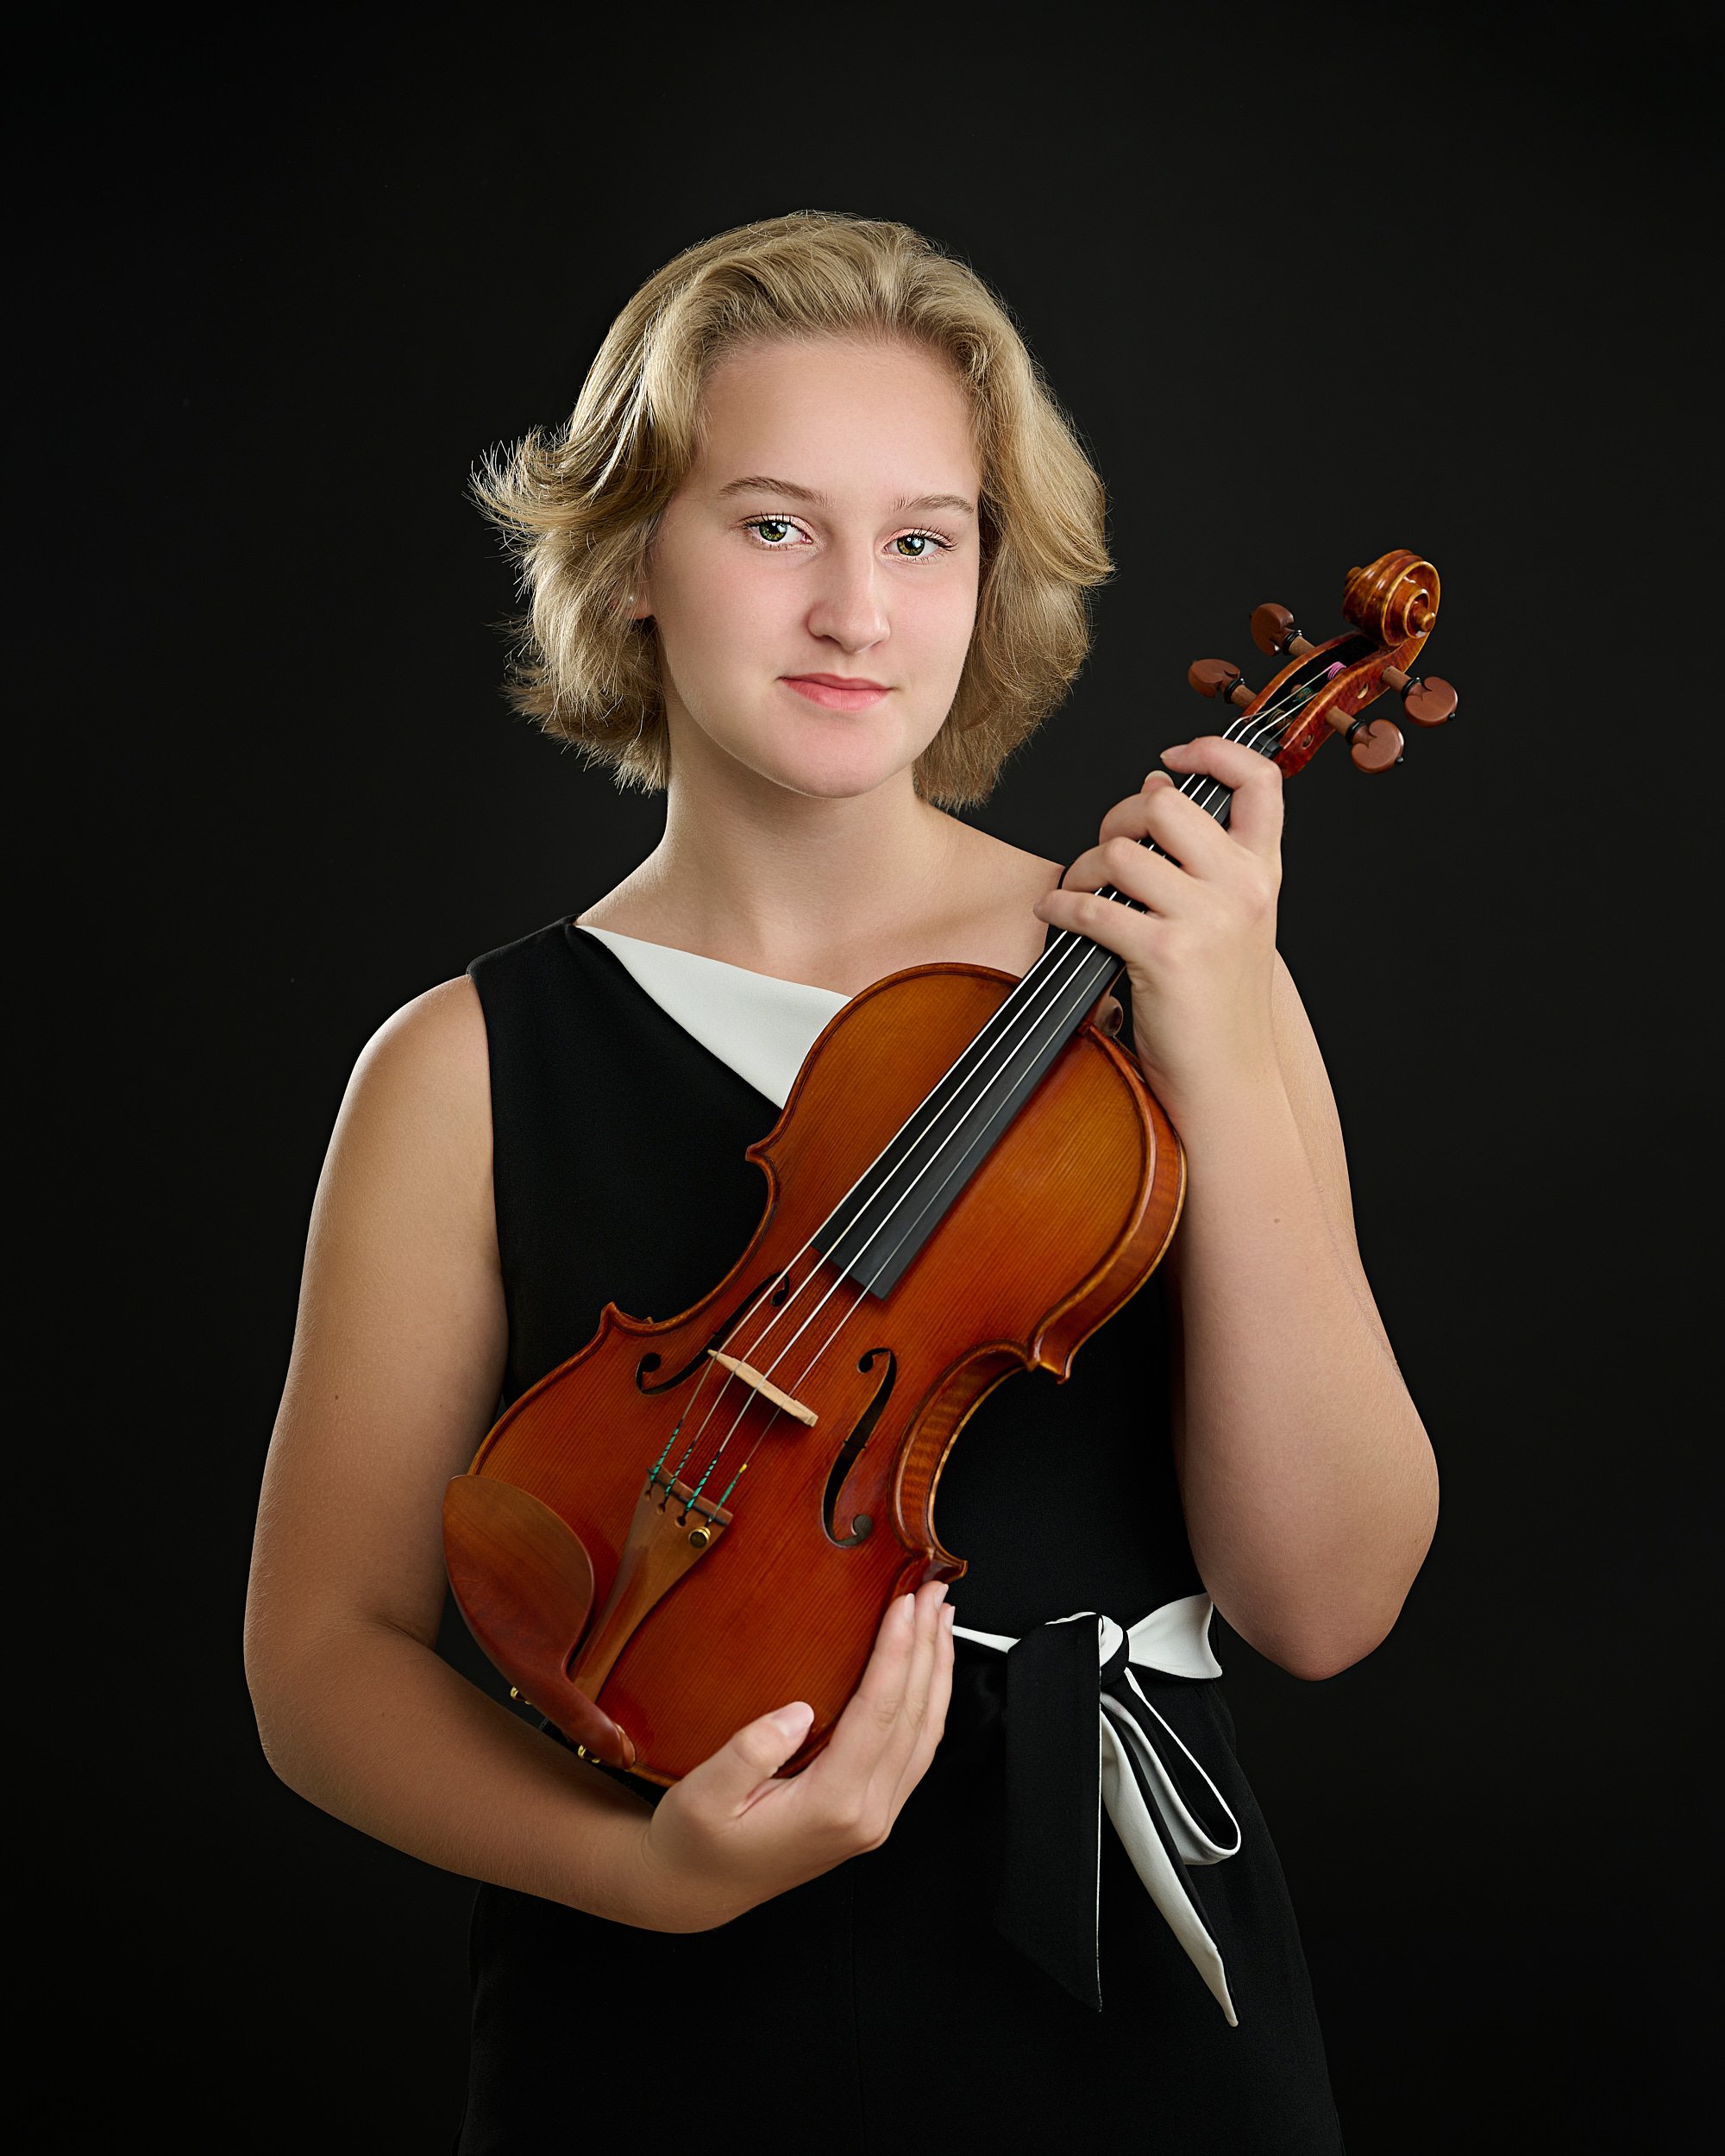  HOUSTON, TEXAS - JUNE 15TH 2022: a beautiful 16-year-old girl with fair skin and short blond hair is posing for studio portraits with her violin made by the string instruments maker Phillip Injeian. 